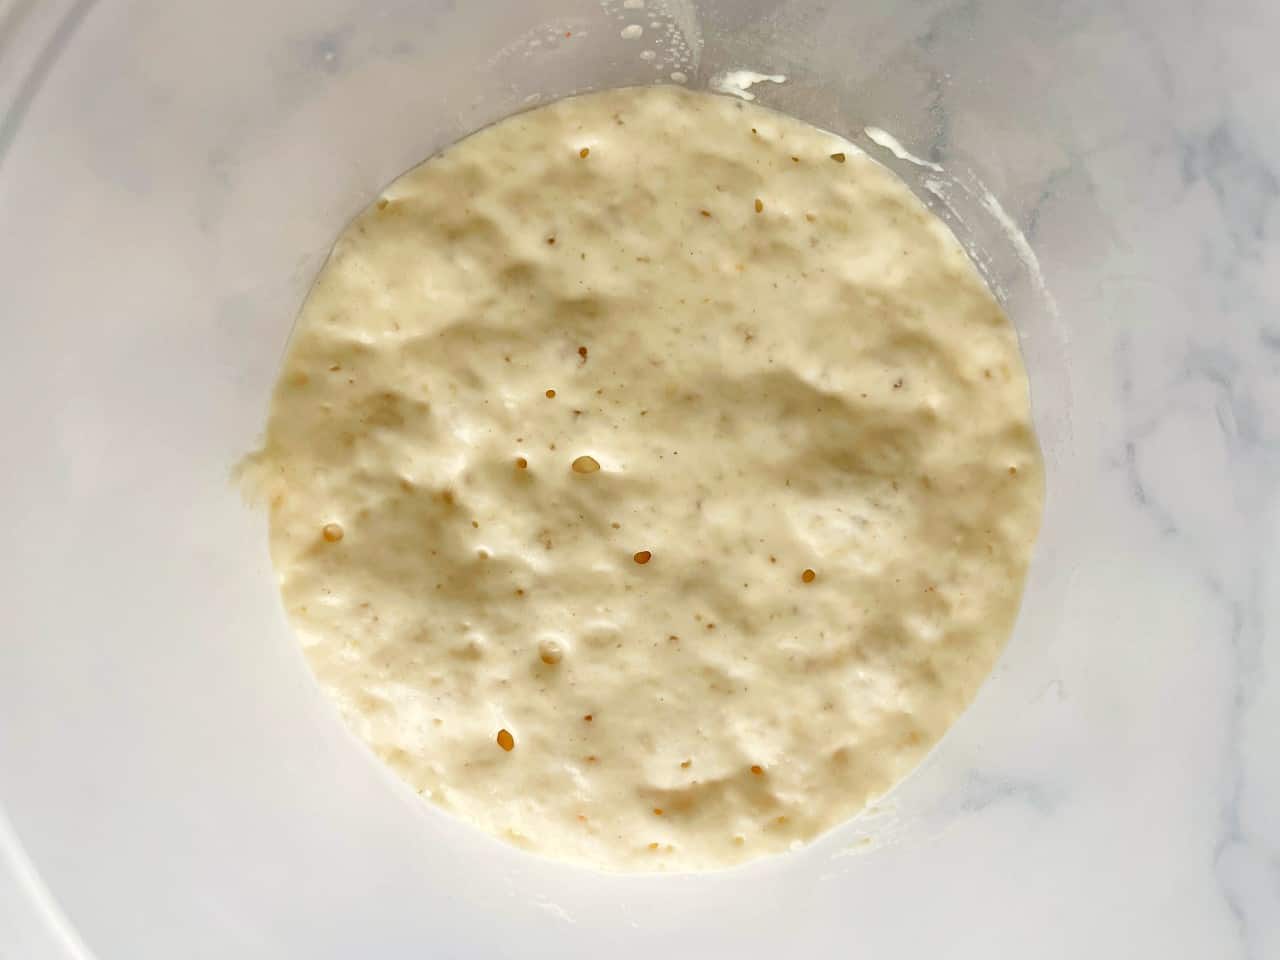 poolish for pizza dough after 1 hour.